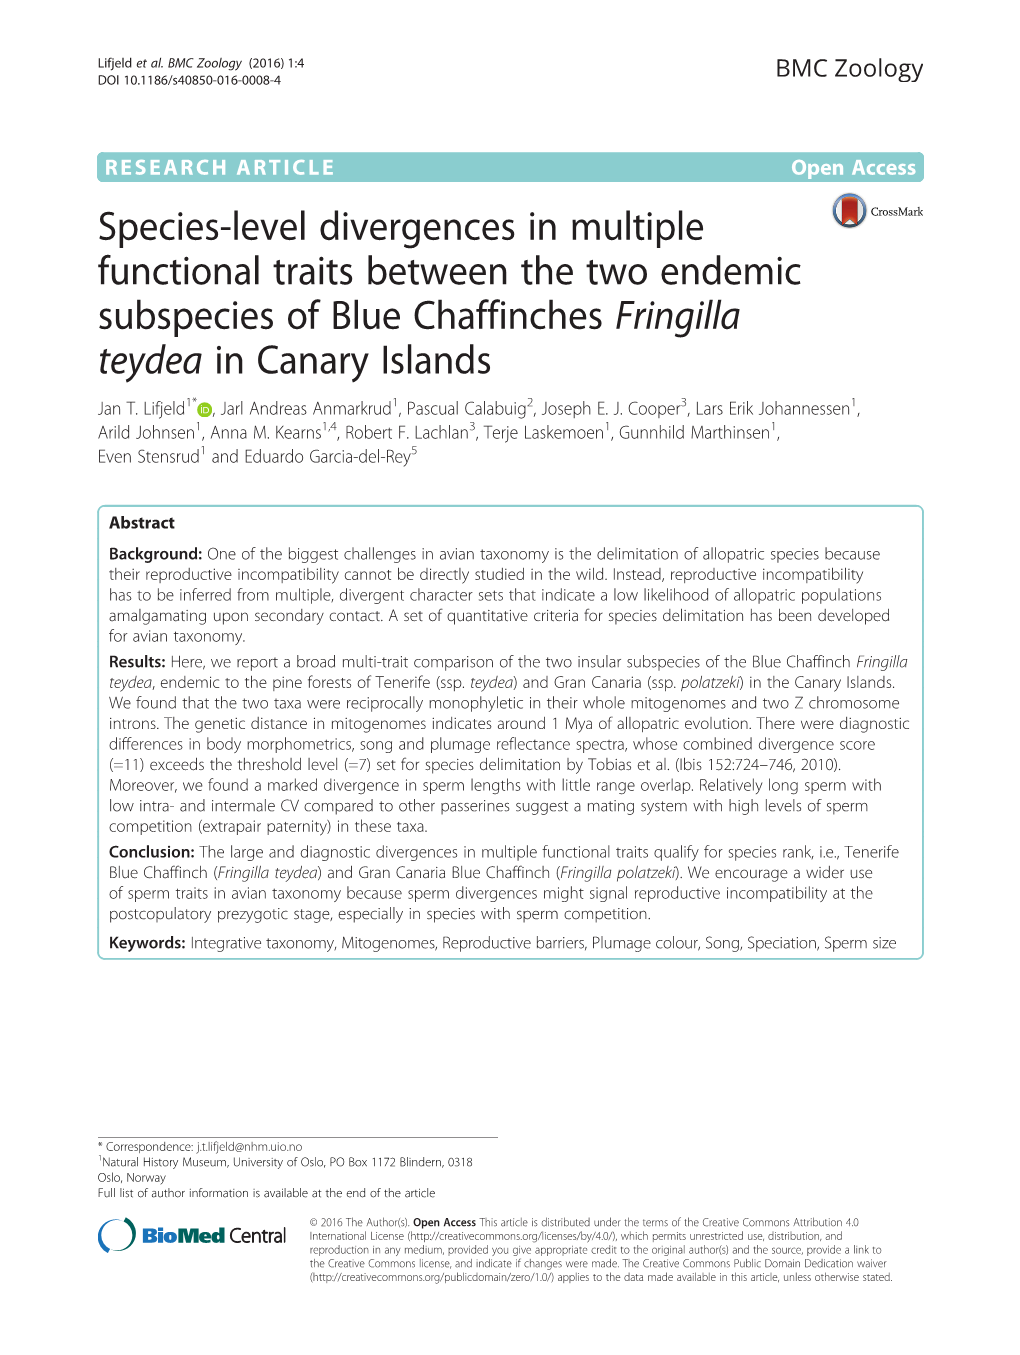 Species-Level Divergences in Multiple Functional Traits Between the Two Endemic Subspecies of Blue Chaffinches Fringilla Teydea in Canary Islands Jan T